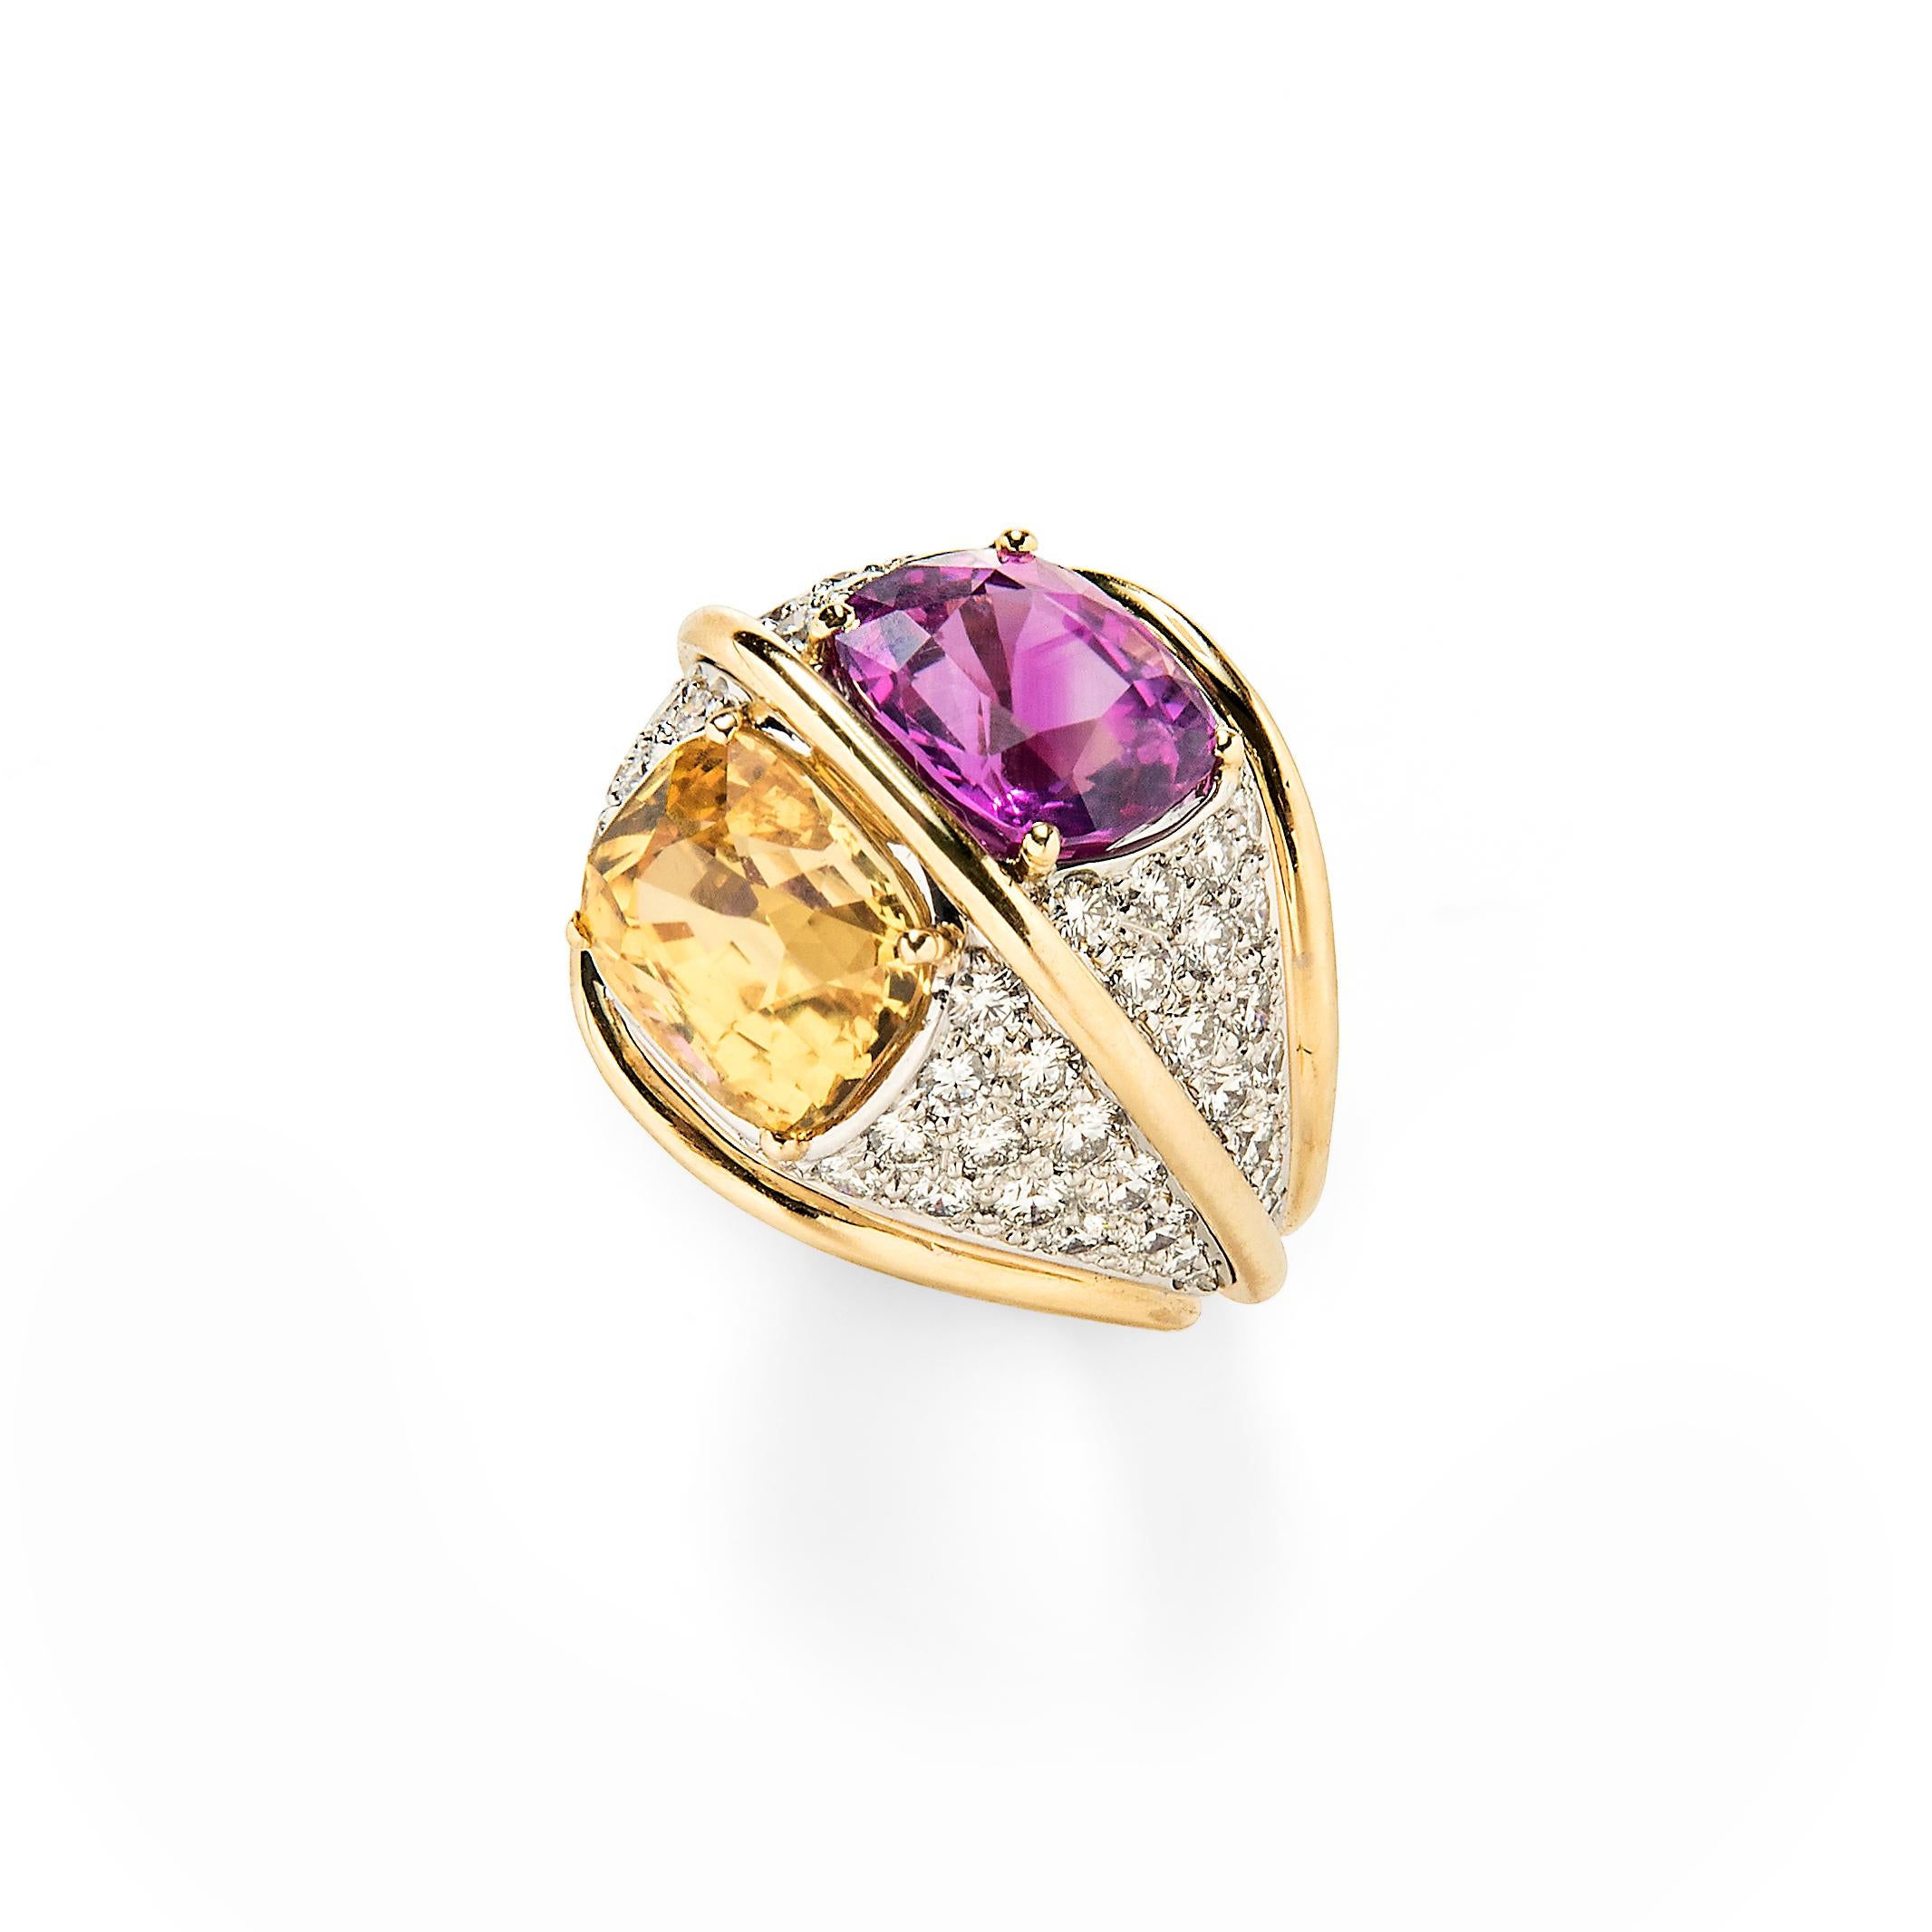 A vivid pink unheated sapphire pairs with a deeply saturated unheated yellow sapphire in this exquisite Verdura dome ring. The striking color combination is further enhanced by pave-set diamonds adorning the ring’s shank.

- Yellow sapphire weighs